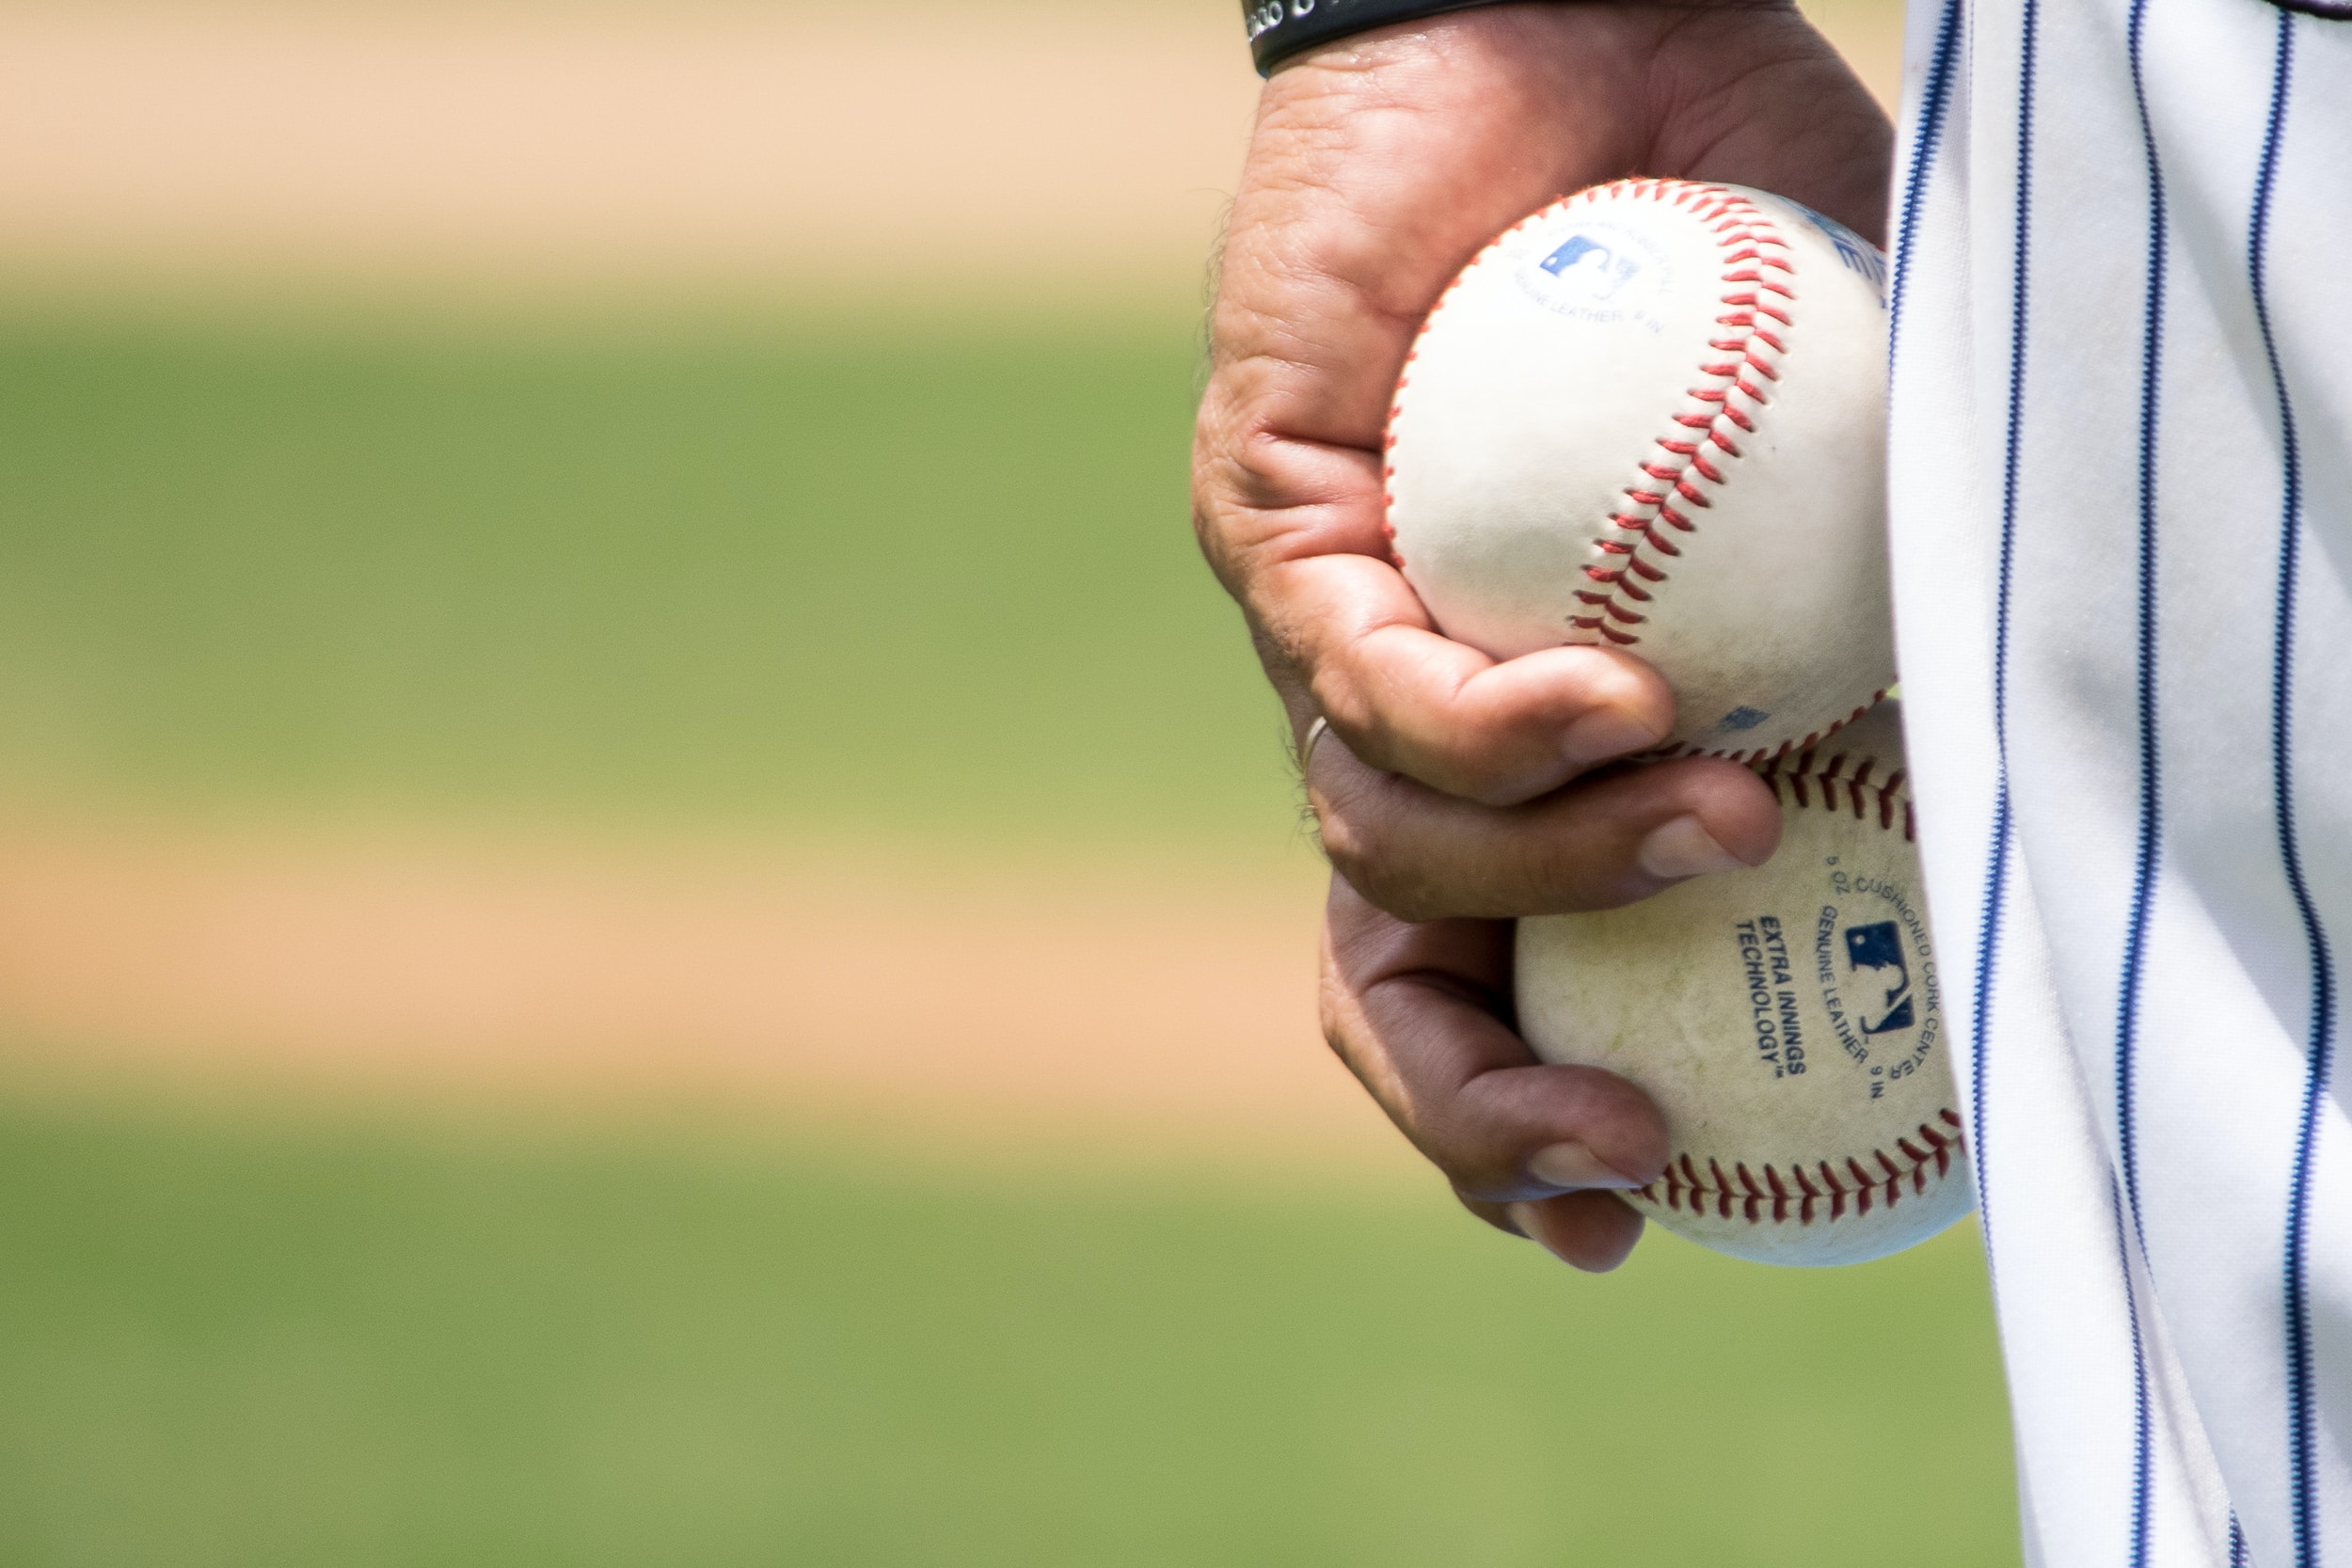 New Sanctions Issued in College Baseball Betting Scandal